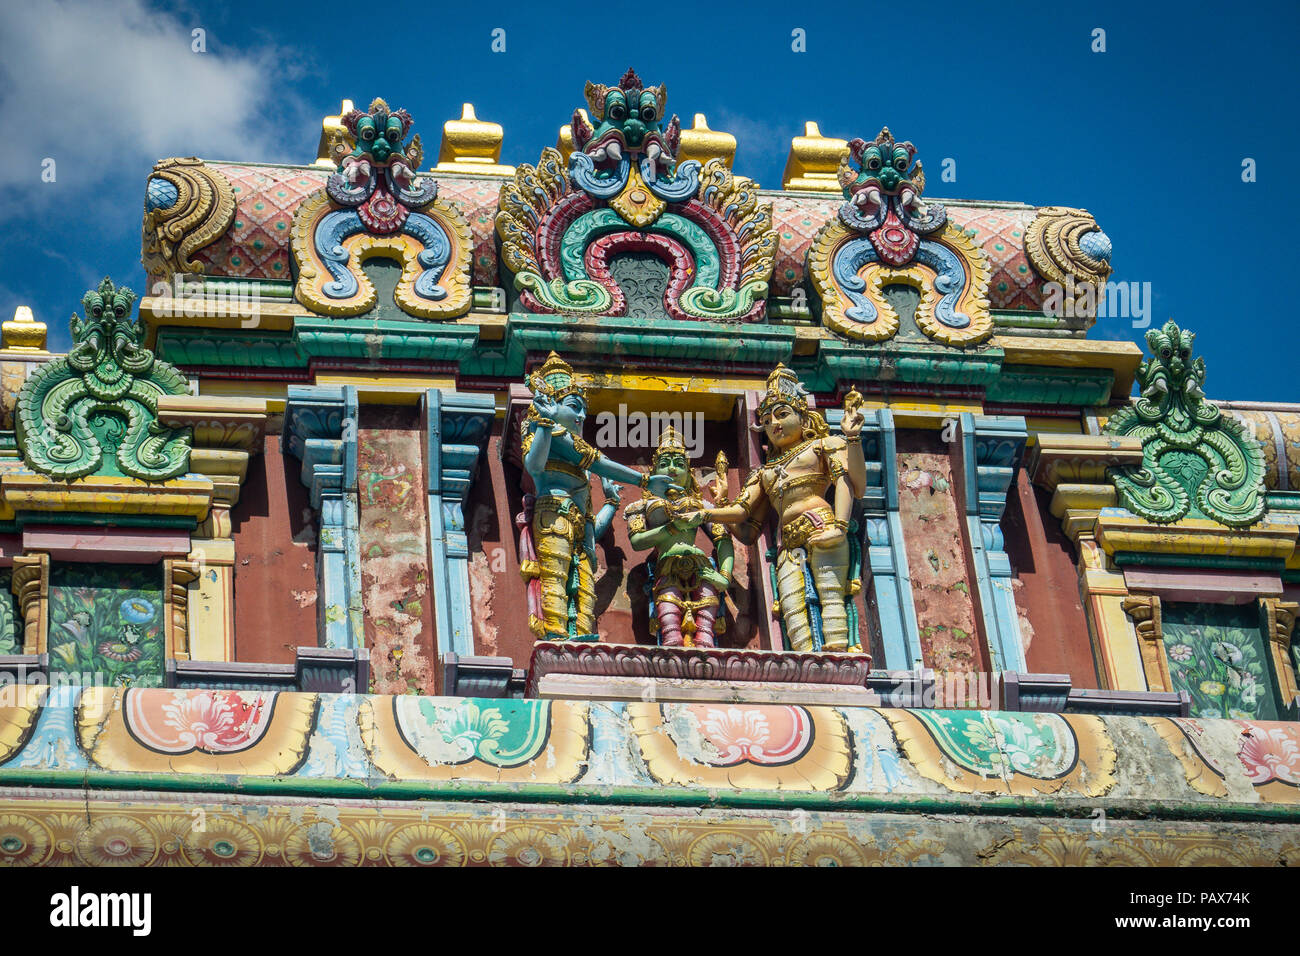 Colorful relief patterns and statues on the  Sri Thendayuthapani Hindu Temple near River Valley Road, Singapore Stock Photo